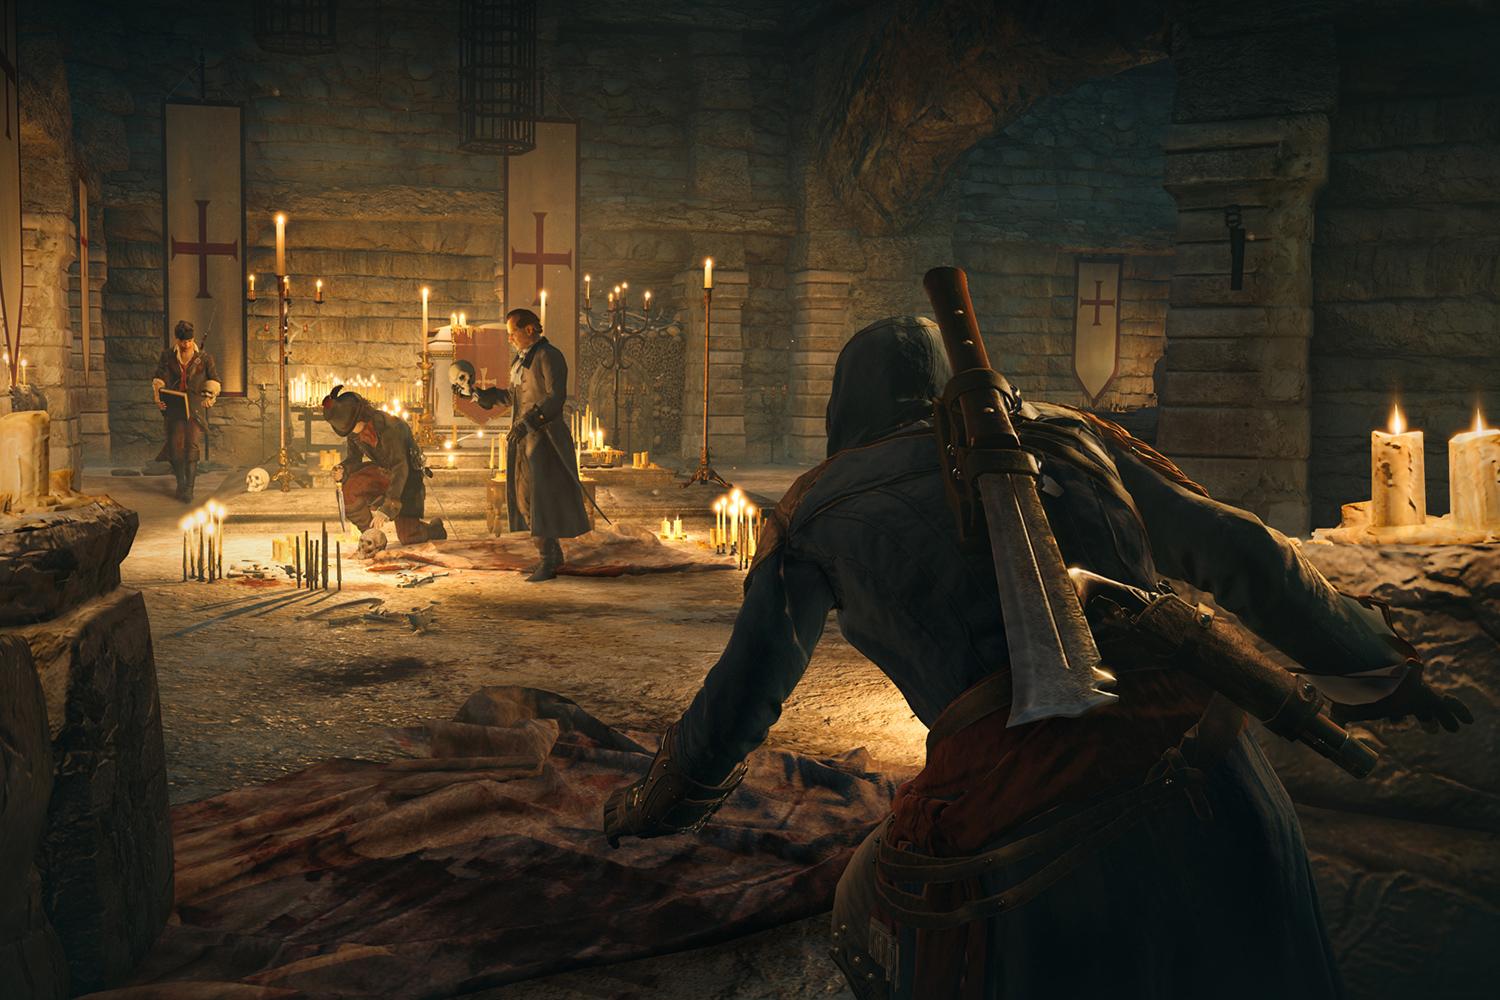 How to Download Assassin's Creed Unity For Android